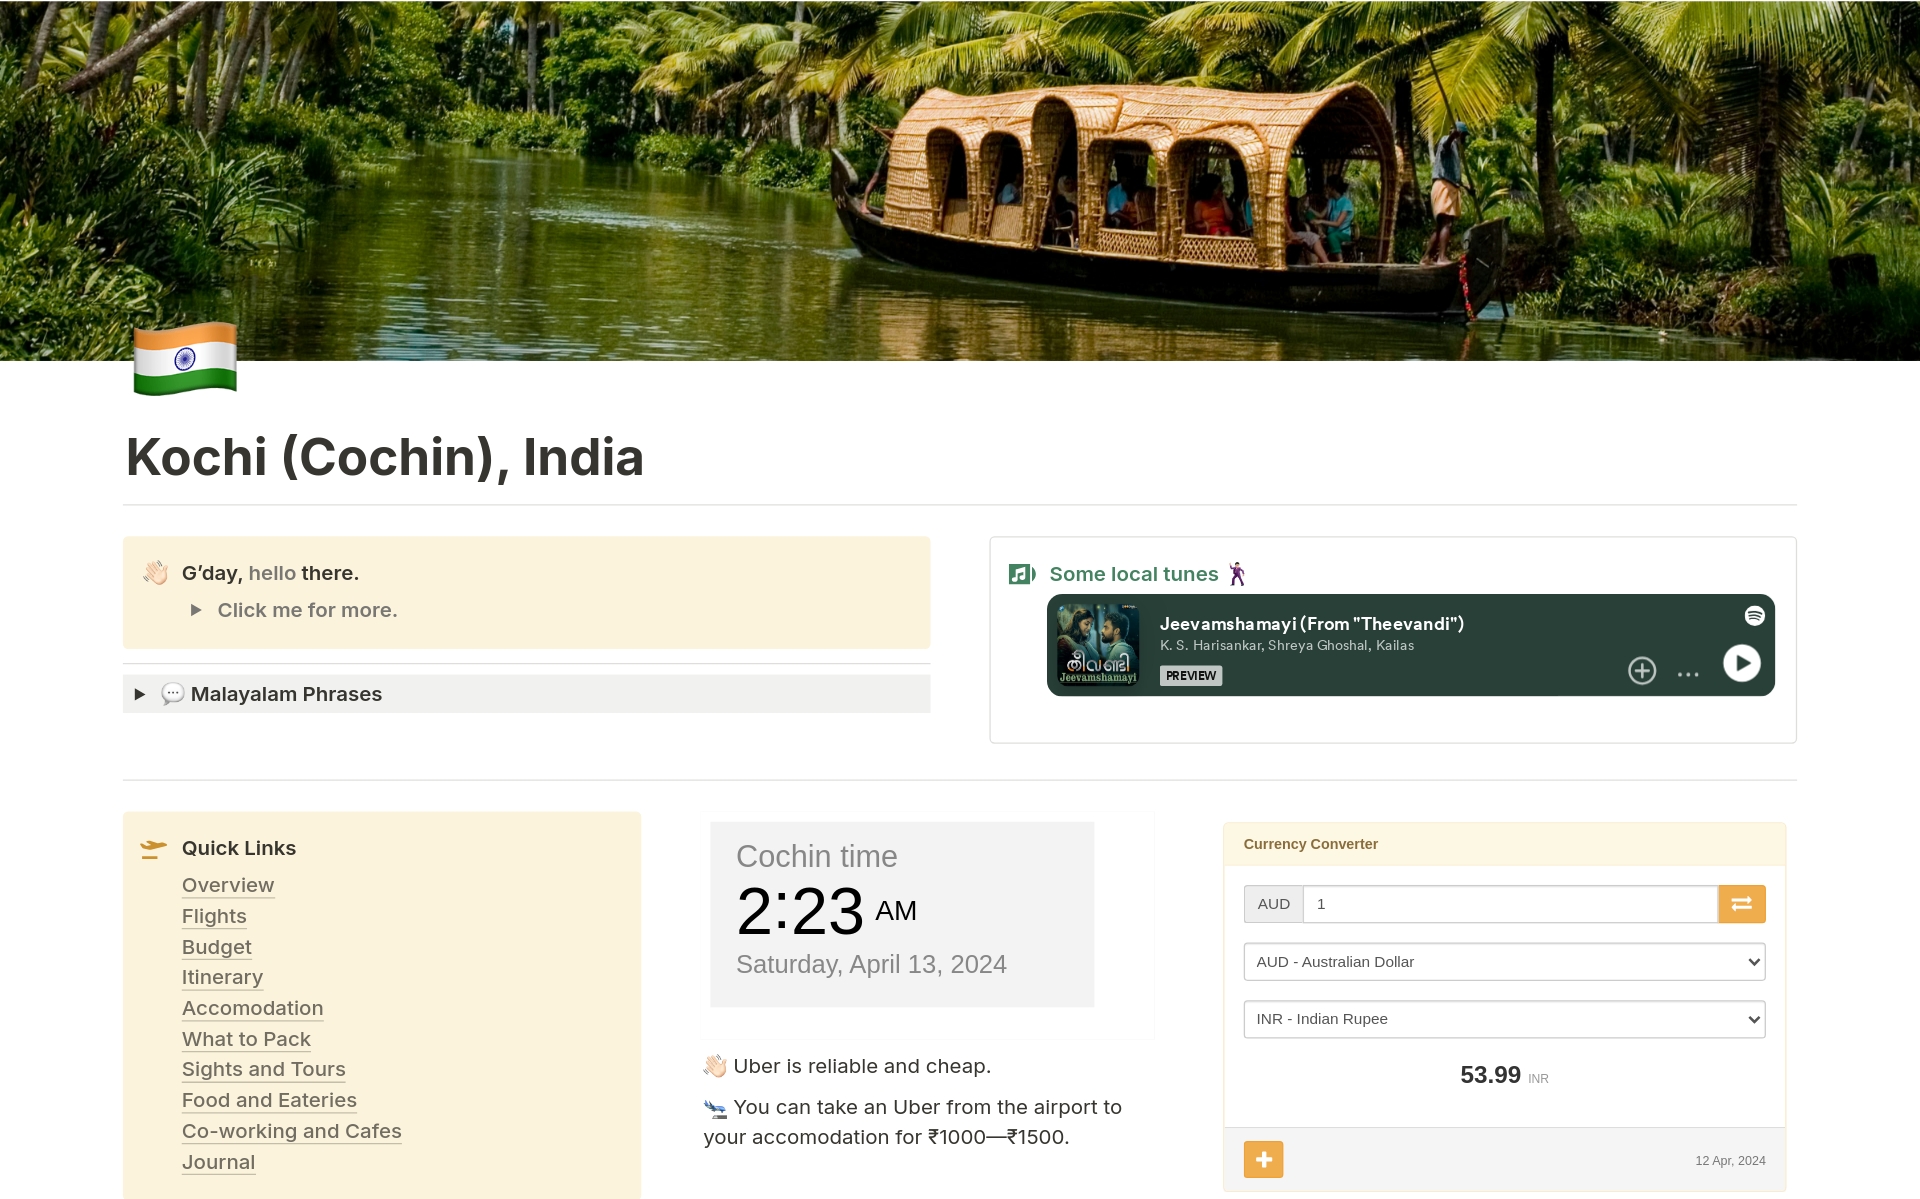 This is the ultimate travel planner and assistant.

Use this guide as a template to plan and manage your upcoming trip.

For anyone looking to travel to Kochi (Cochin), India, you want this guide.